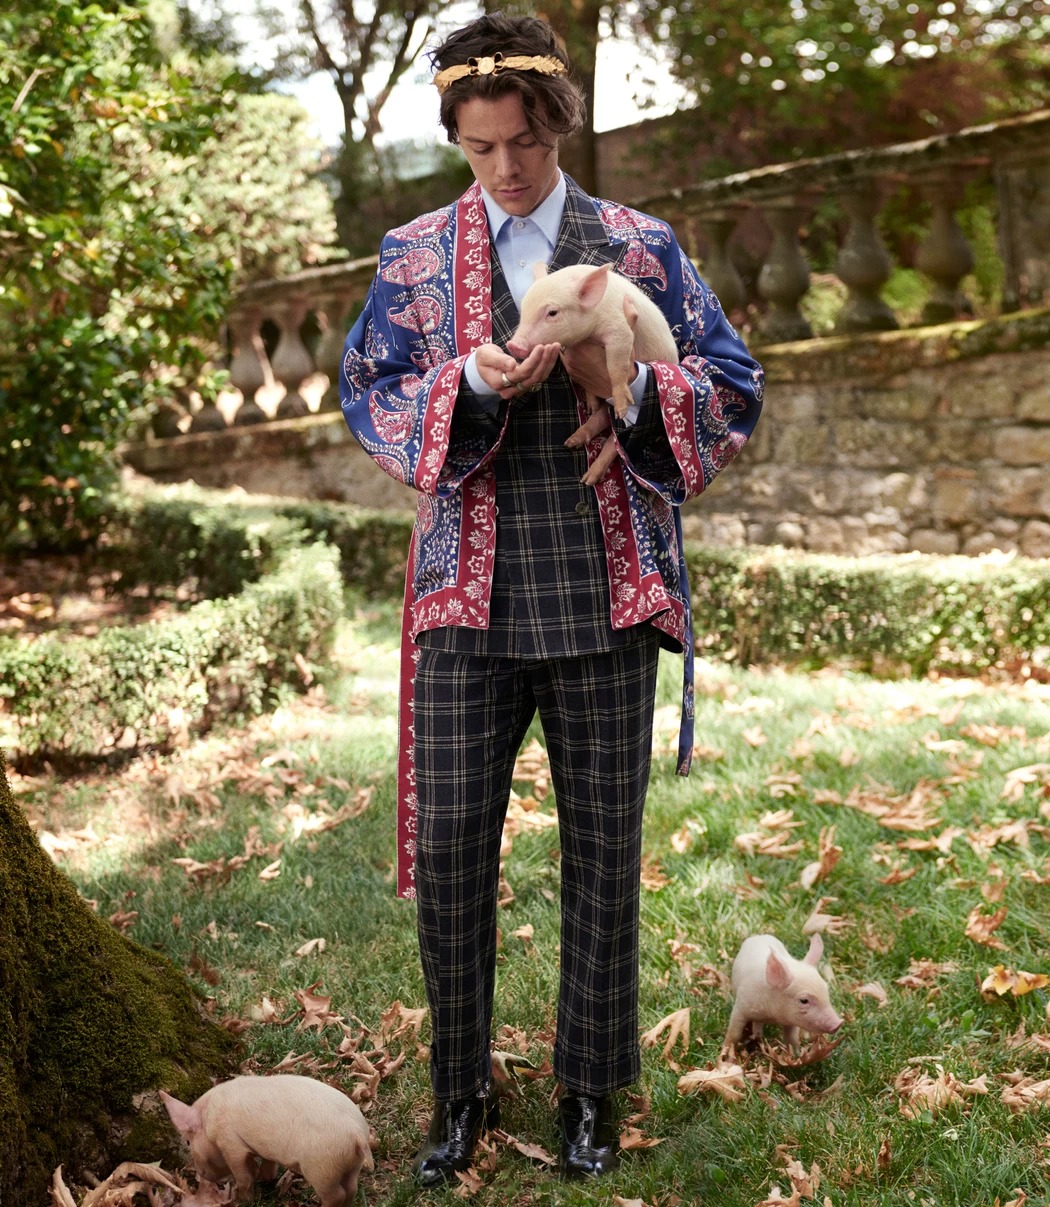 Harry Styles per gucci - neomag.